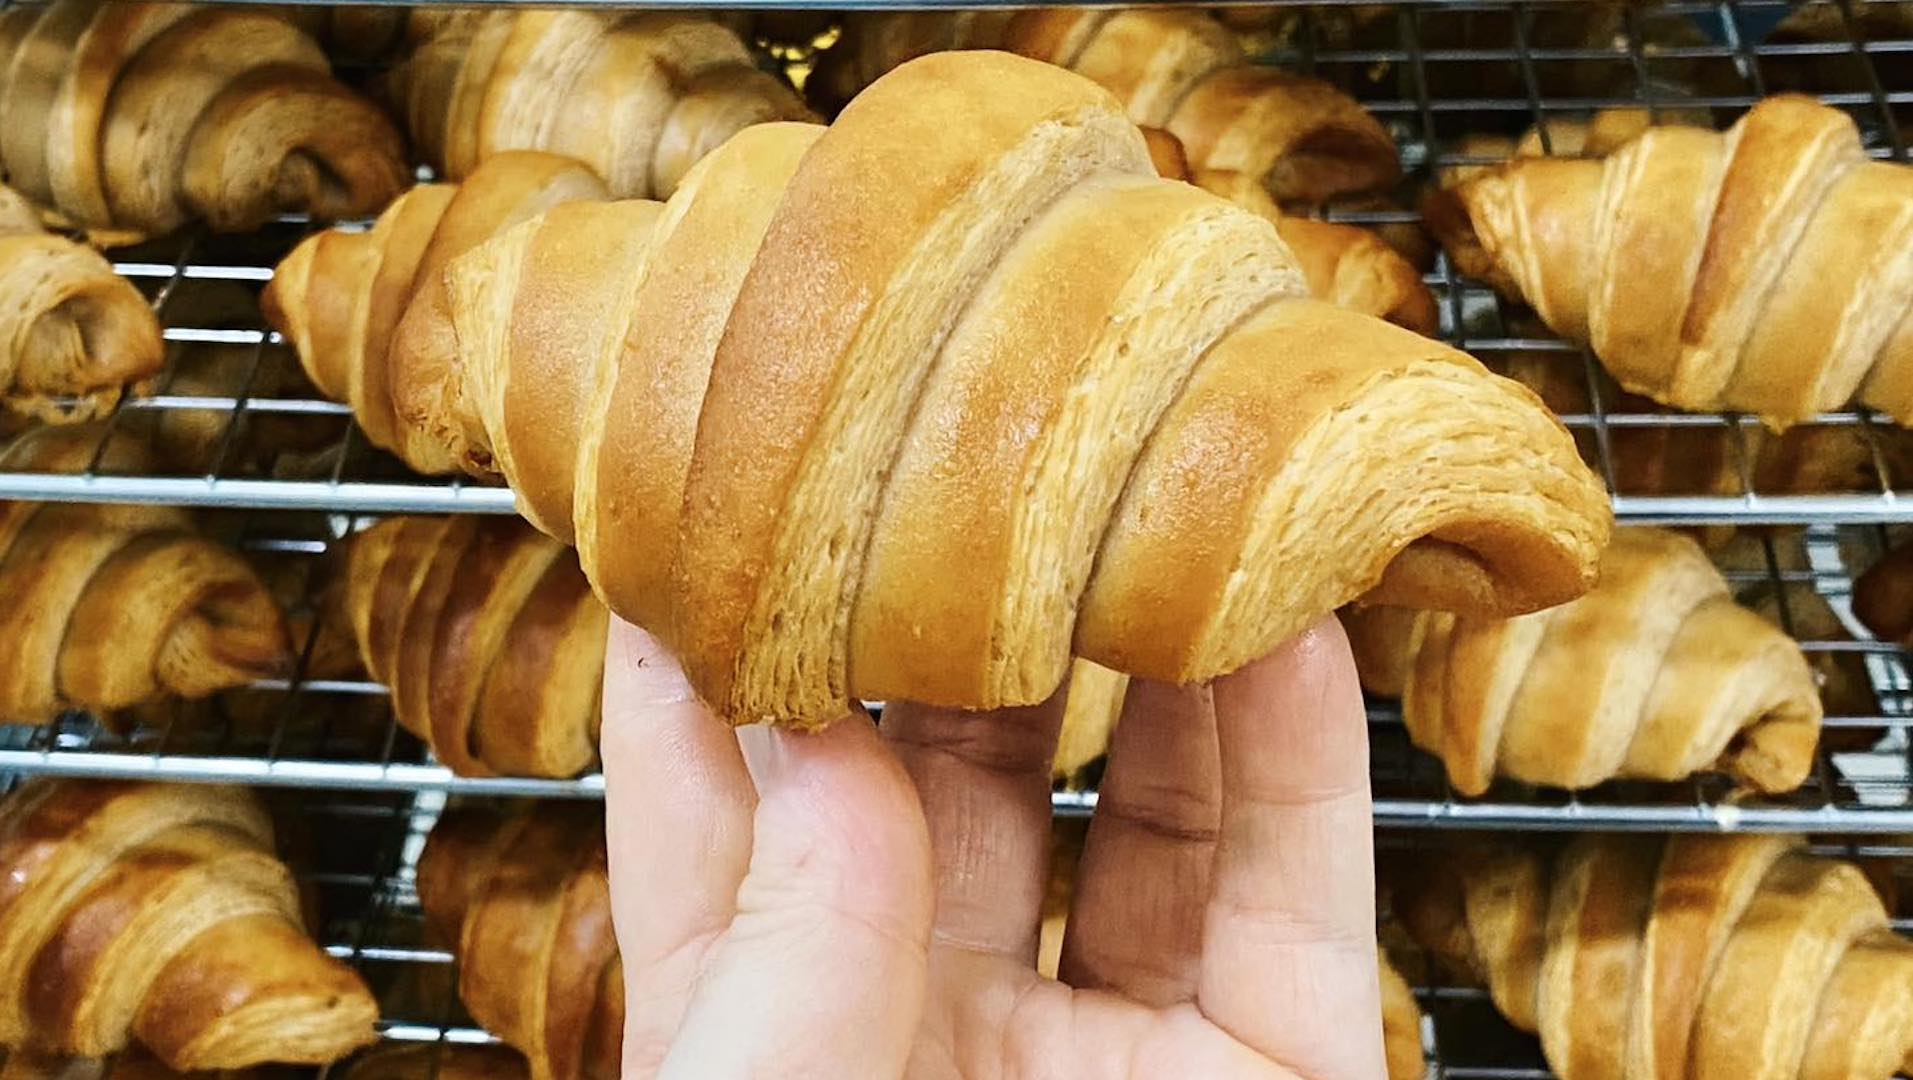 Gluten-Free Living Queensland bakery guide: a hand holding up a freshly baked croissant in front of rows of golden croissants on baking trays fresh out of the oven.